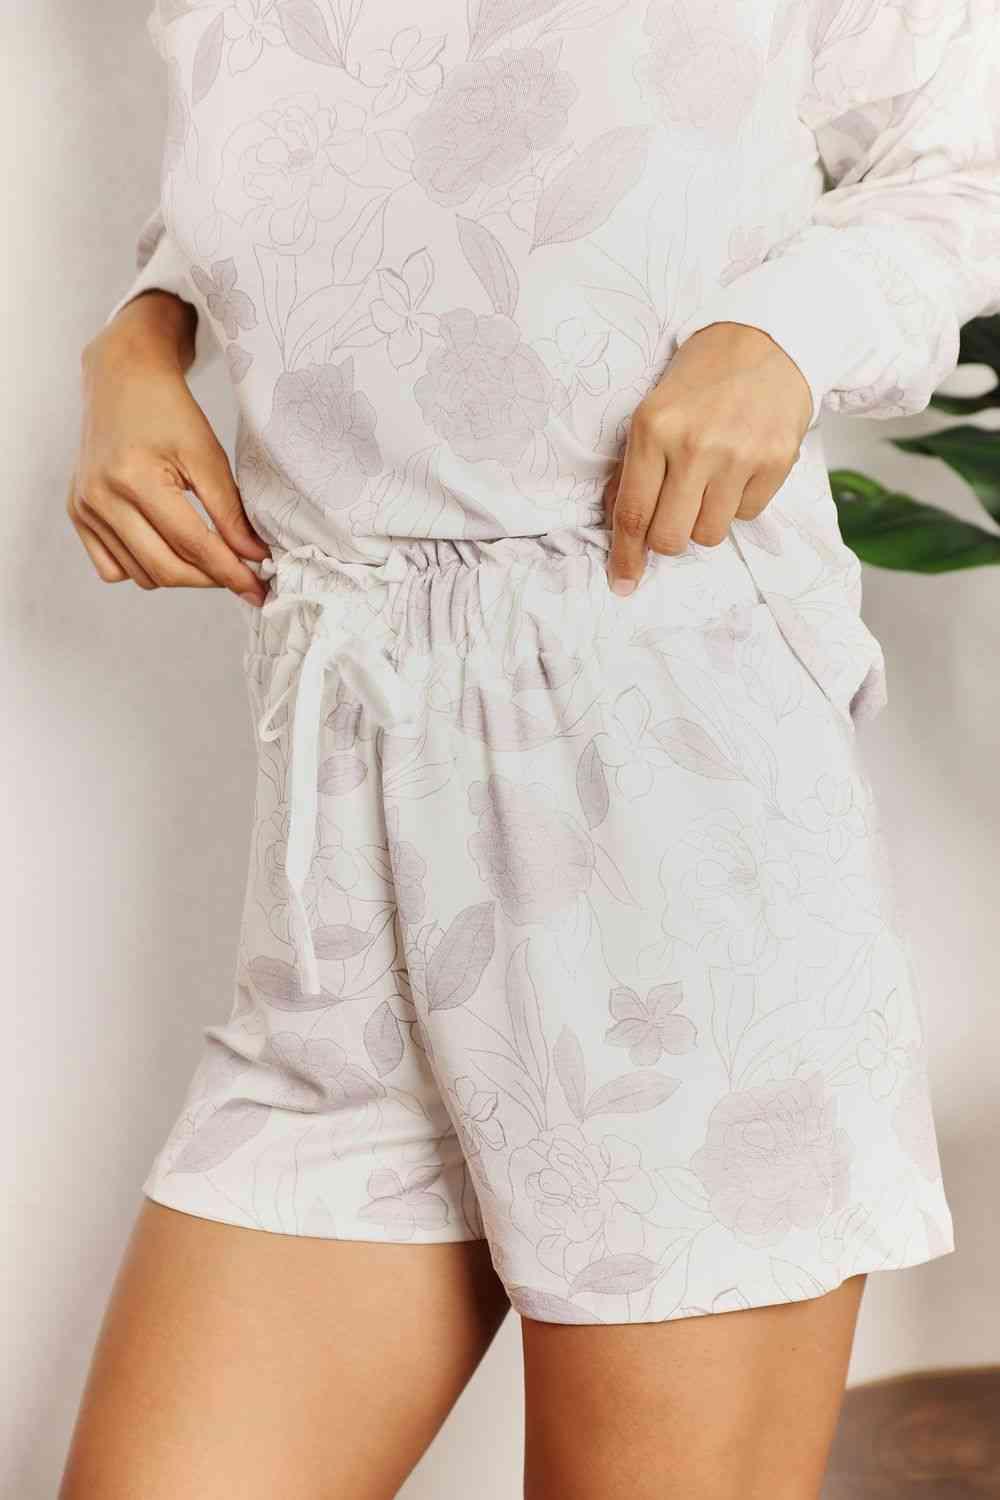 Double Take Floral Long Sleeve Top and Shorts Loungewear Set - AMIClubwear